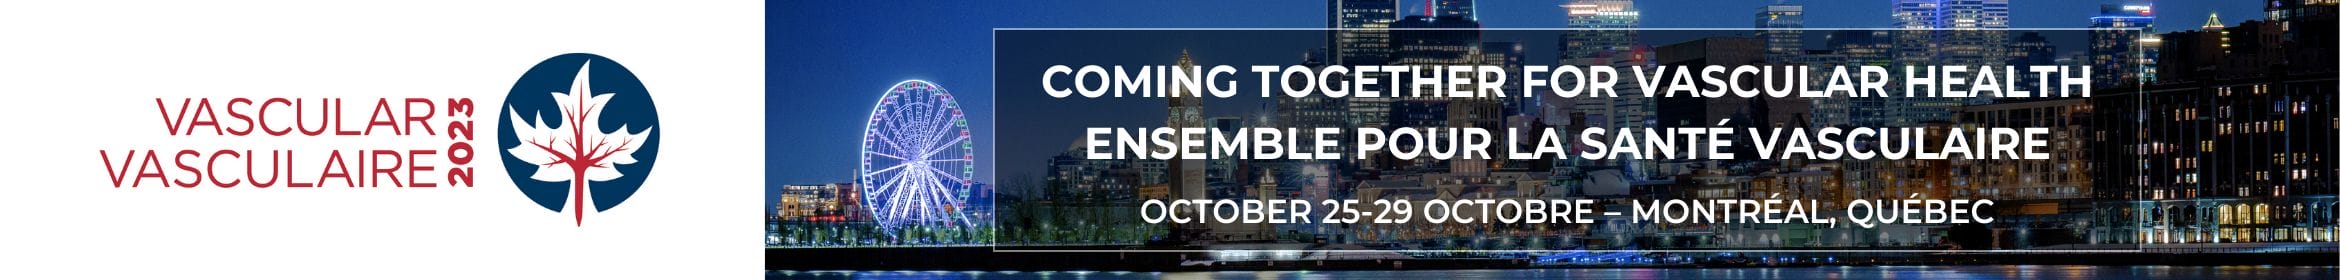 Banner for a vascular health conference in montreal, quebec, from october 29 to october 30, featuring city skyline and ferris wheel at night.